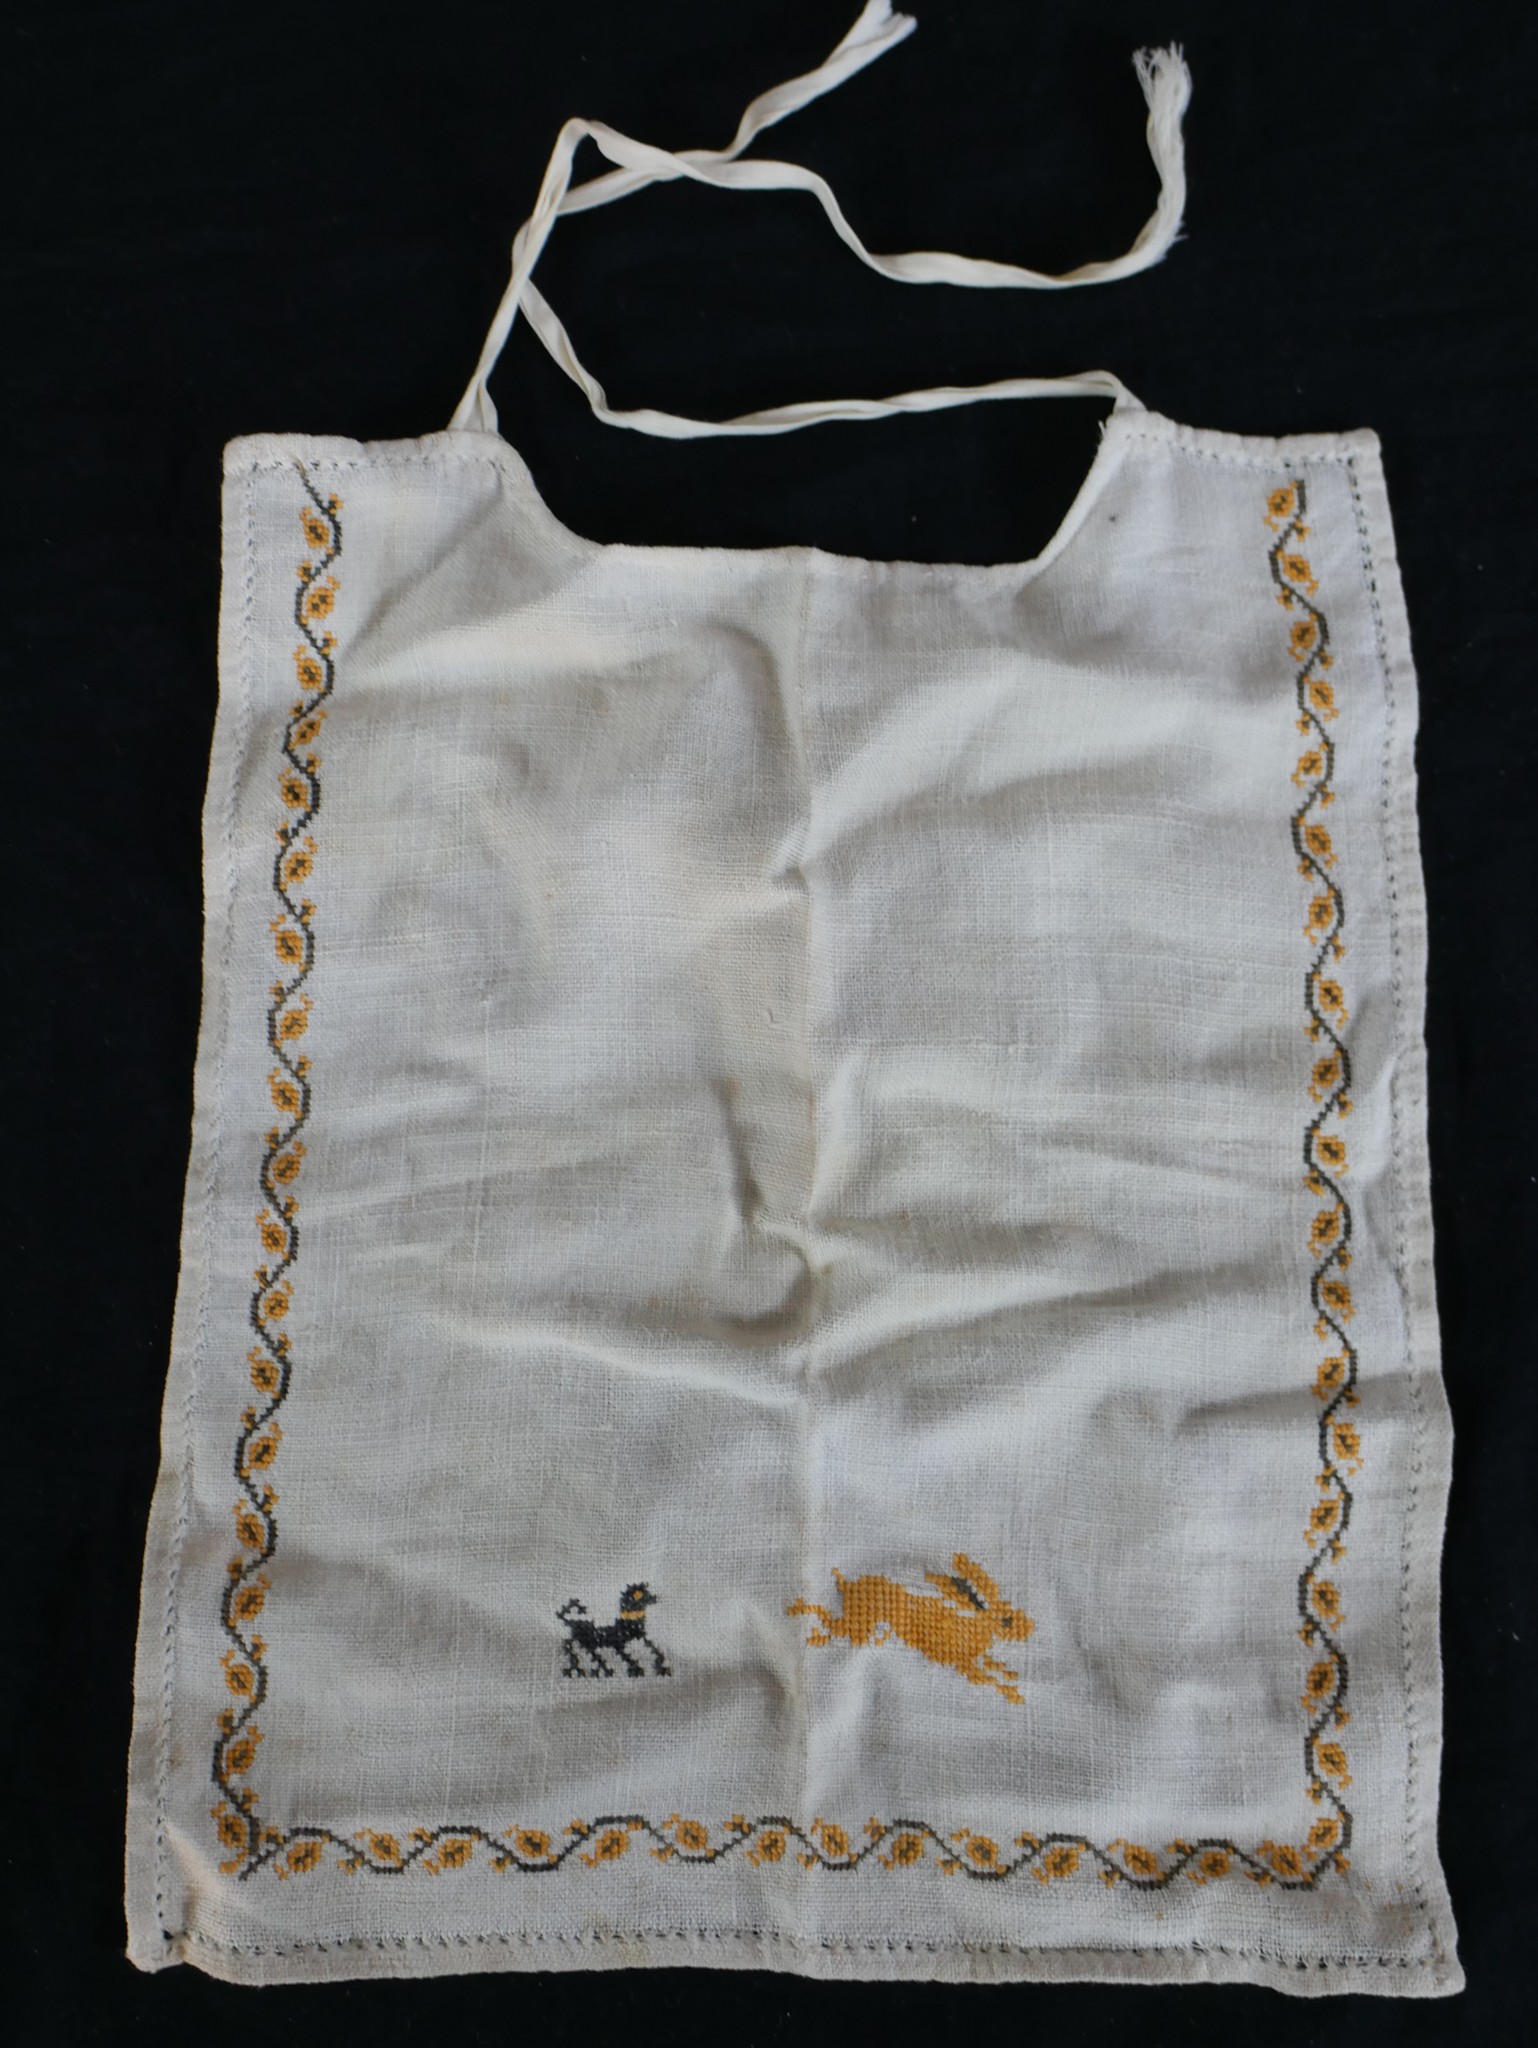 A 19th/ early 20th century sewing kit, together with an embroidered bag and a child's bib. H.27 W. - Image 2 of 6